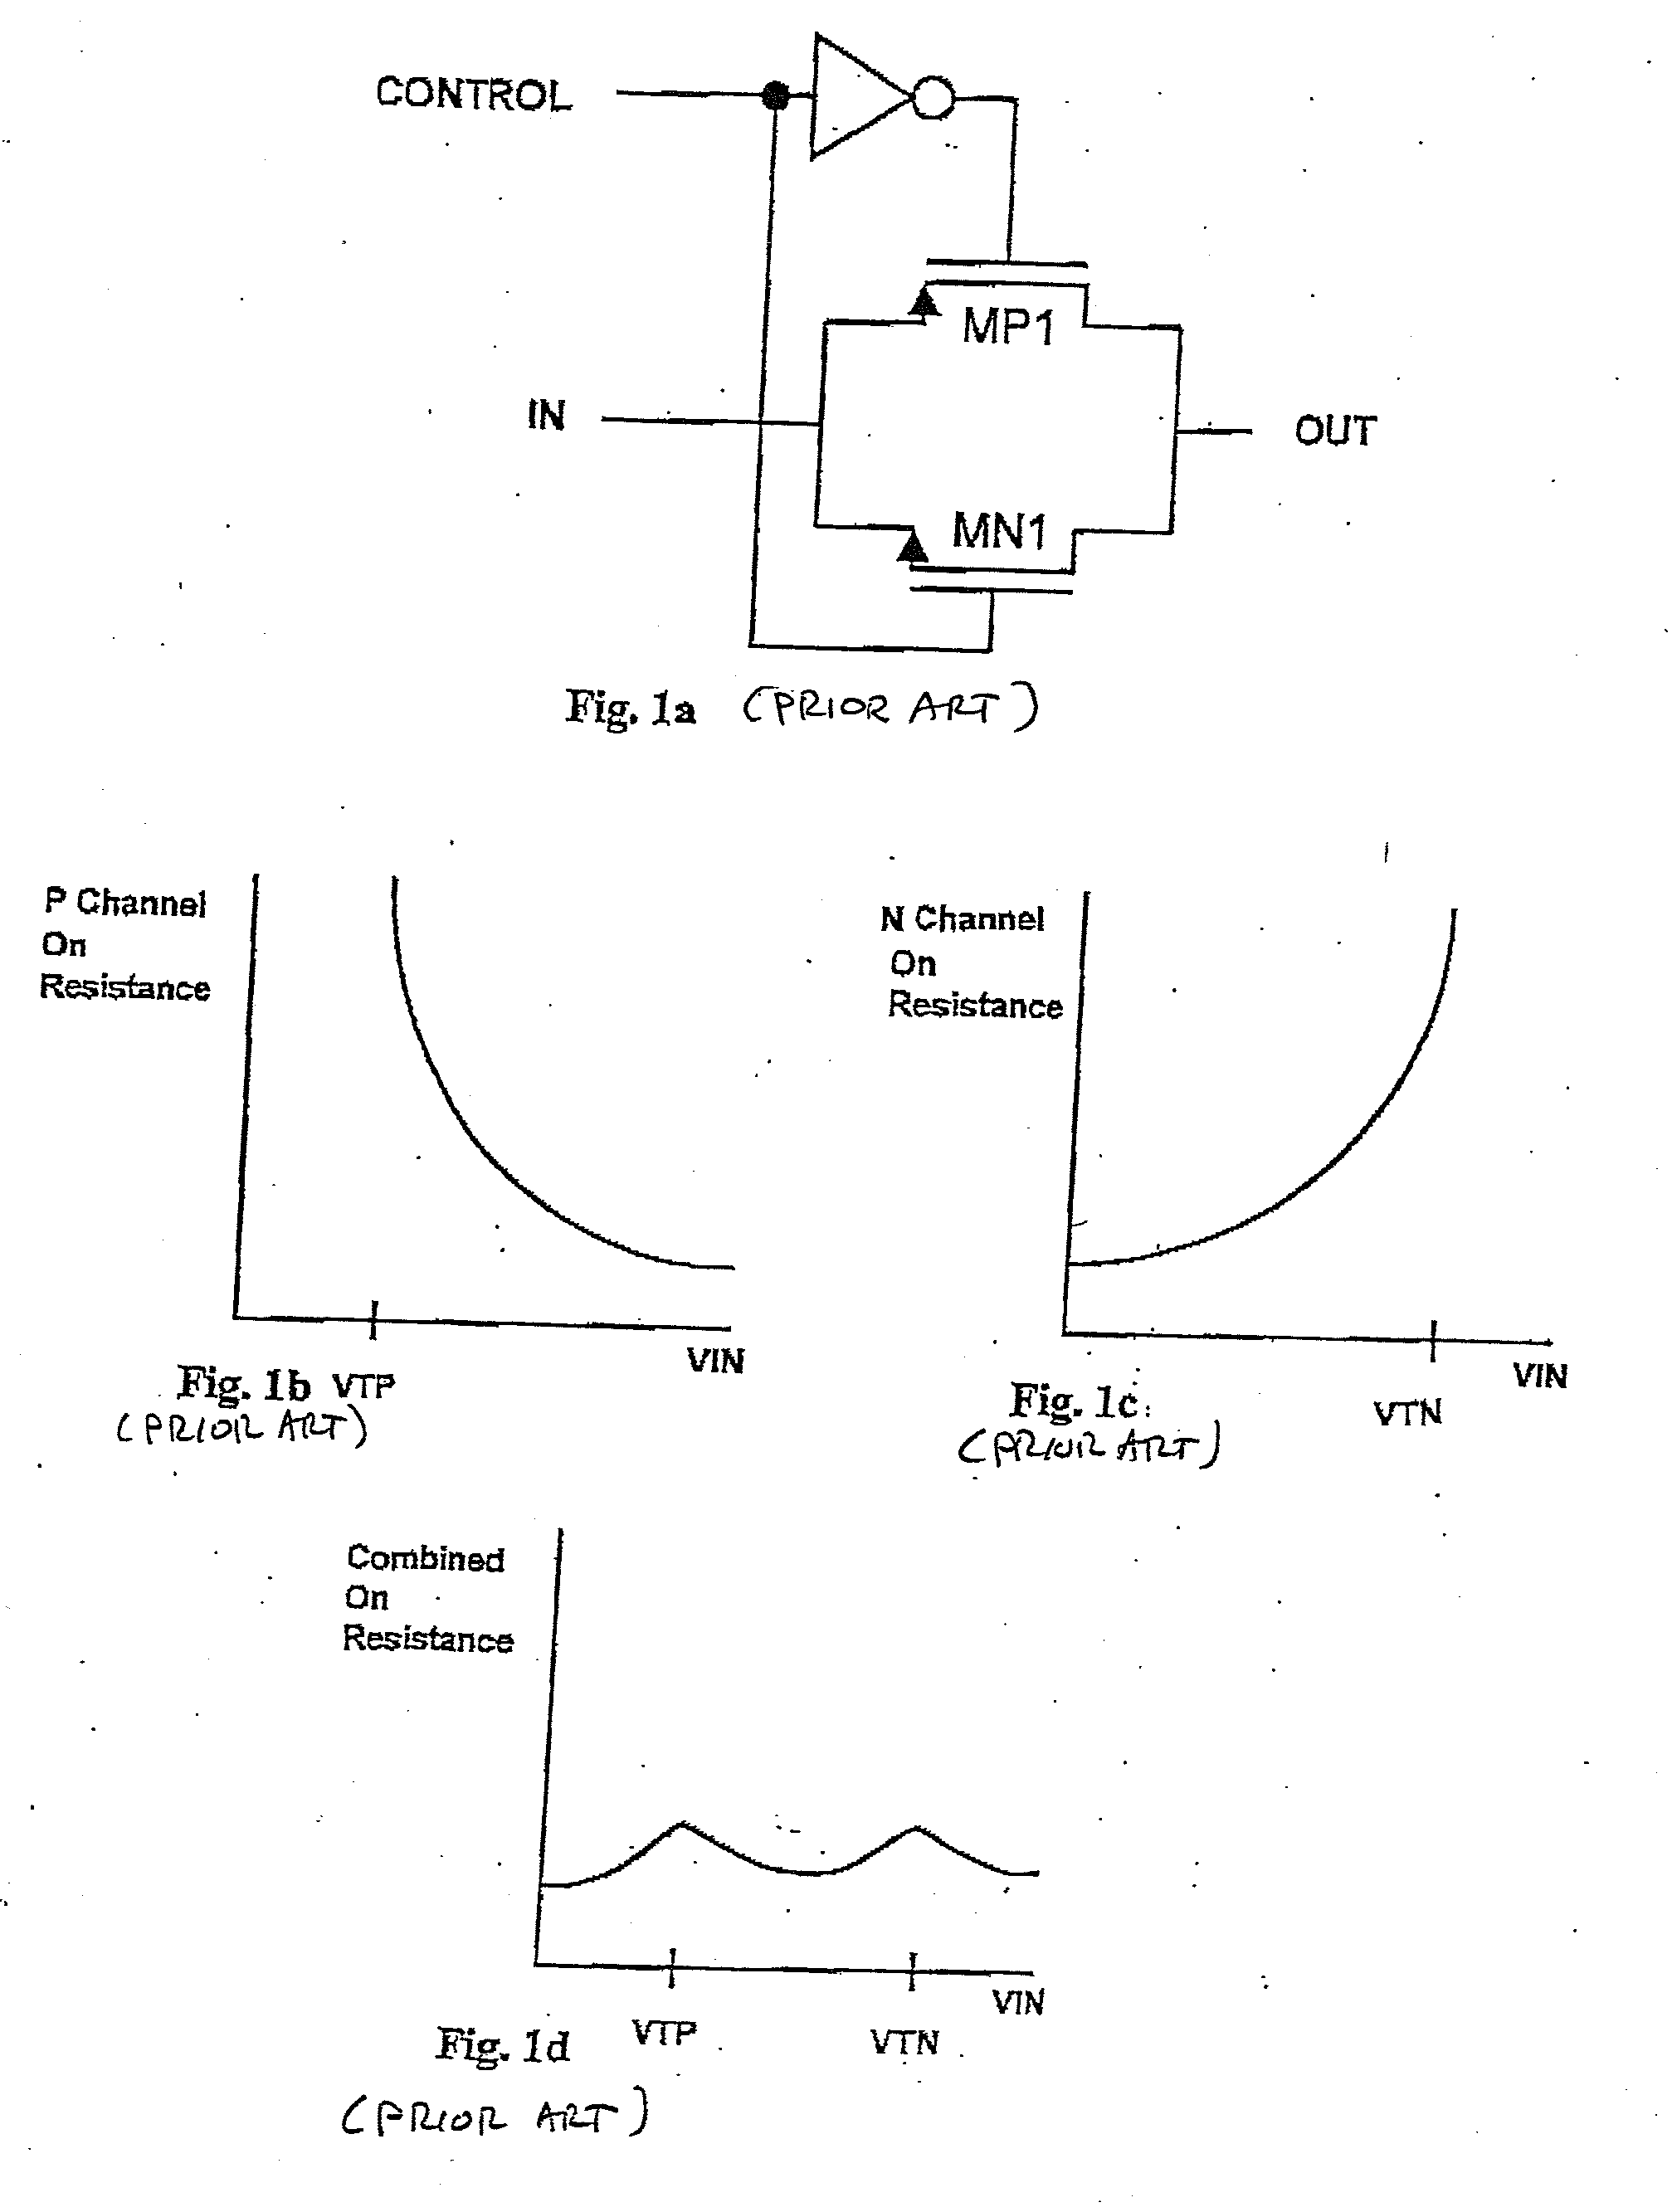 Method And Apparatus For Switching Audio And Data Signals Through A Single Terminal